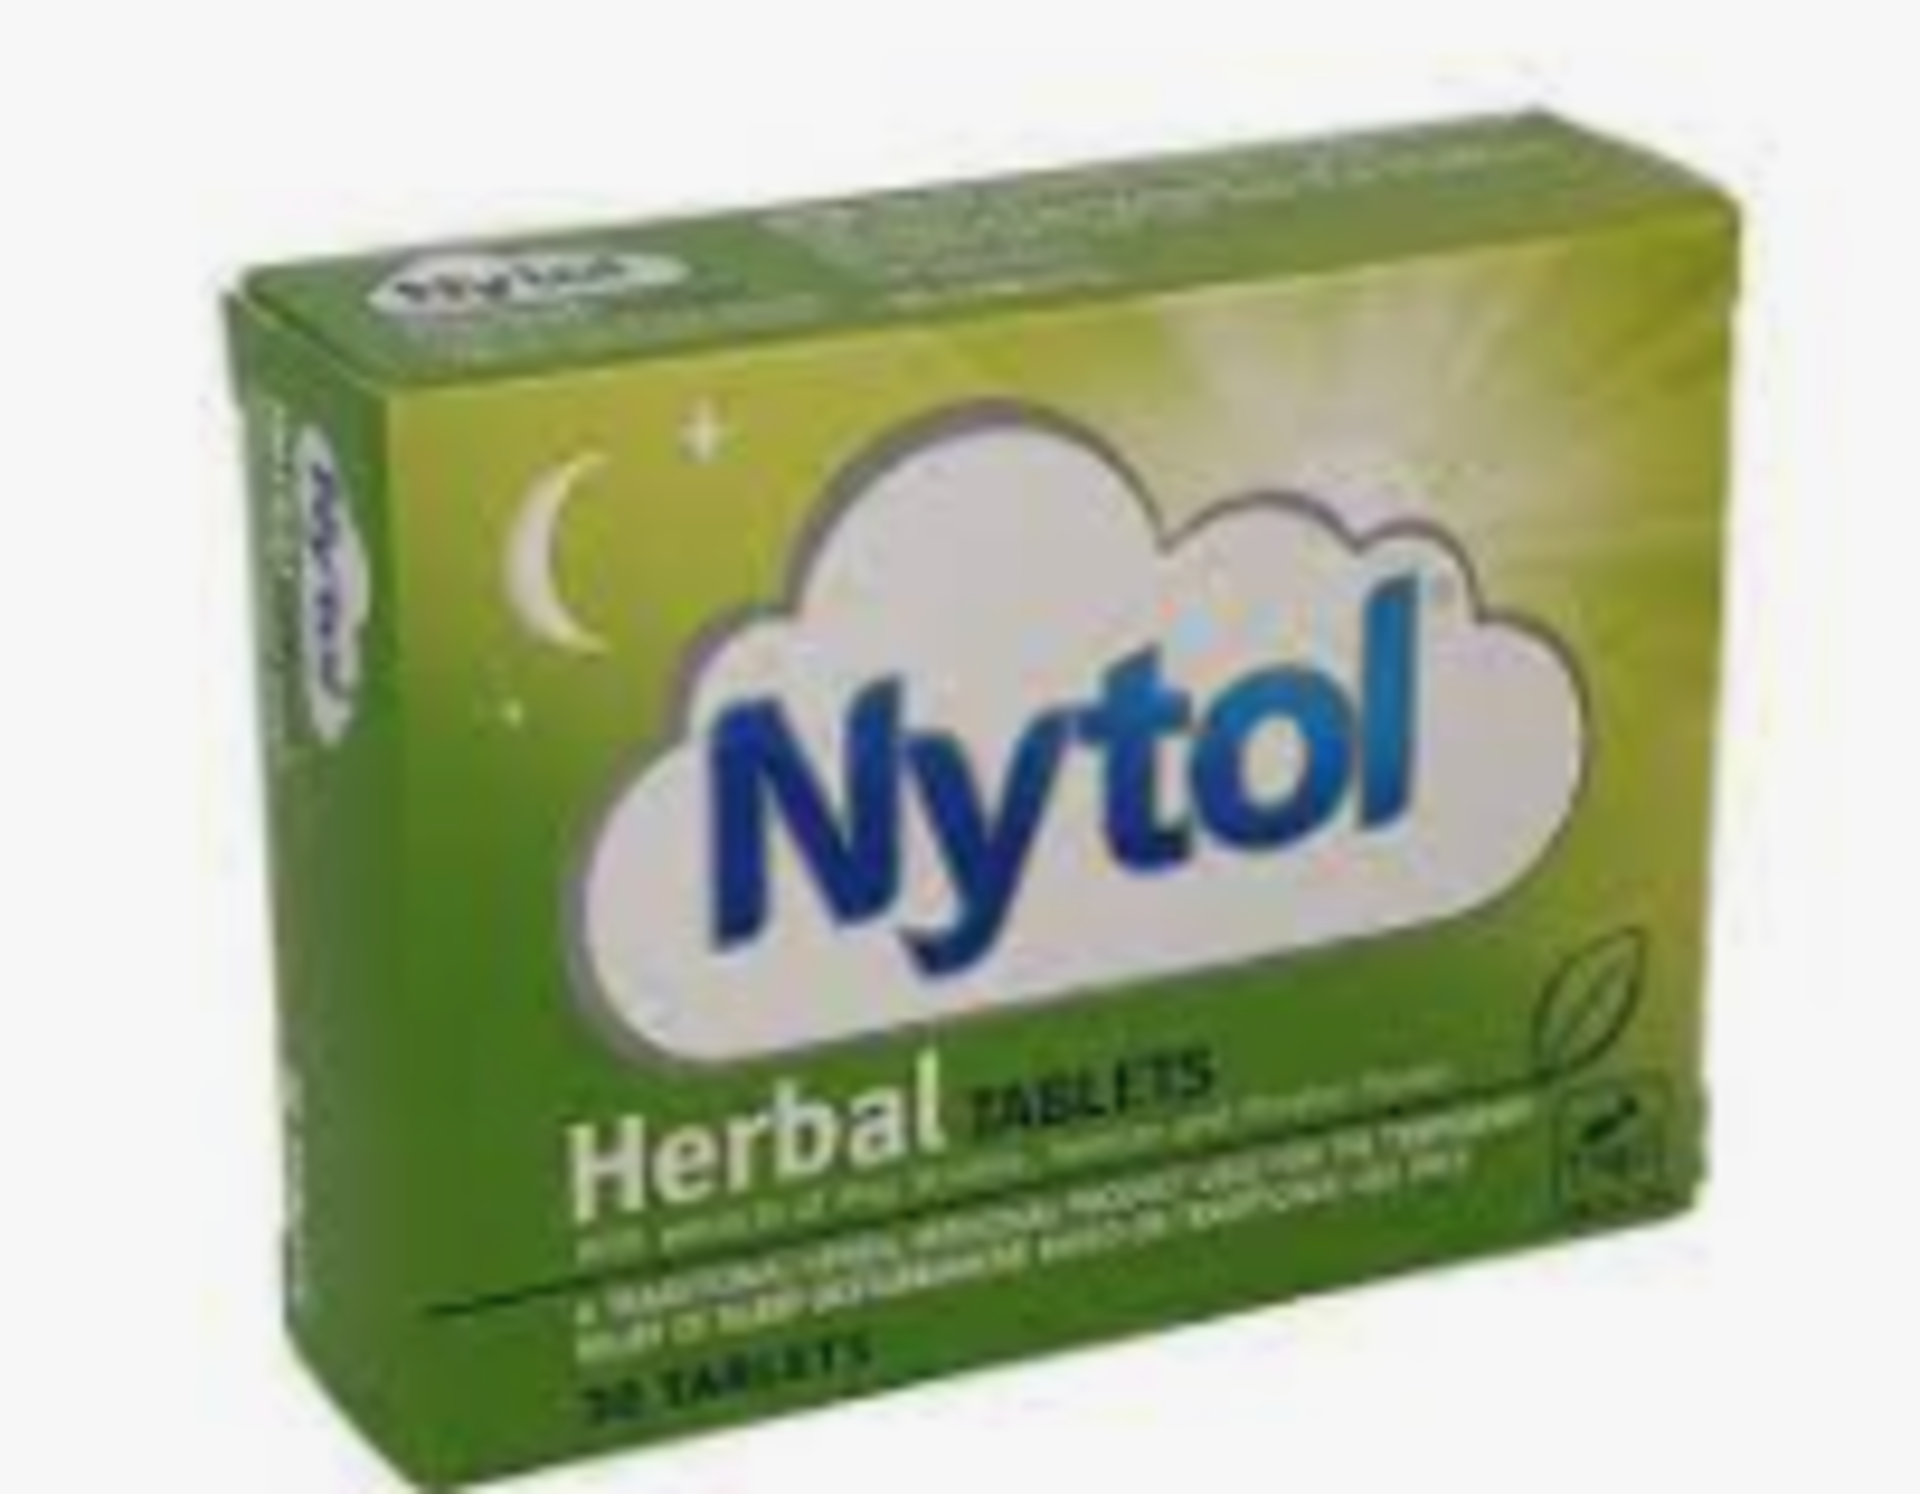 RRP £5945 (Approx. Count 794) Spw49D6844Y Nytol Herbal Tablets,30 Count (Pack Of 1) Nytol Herbal